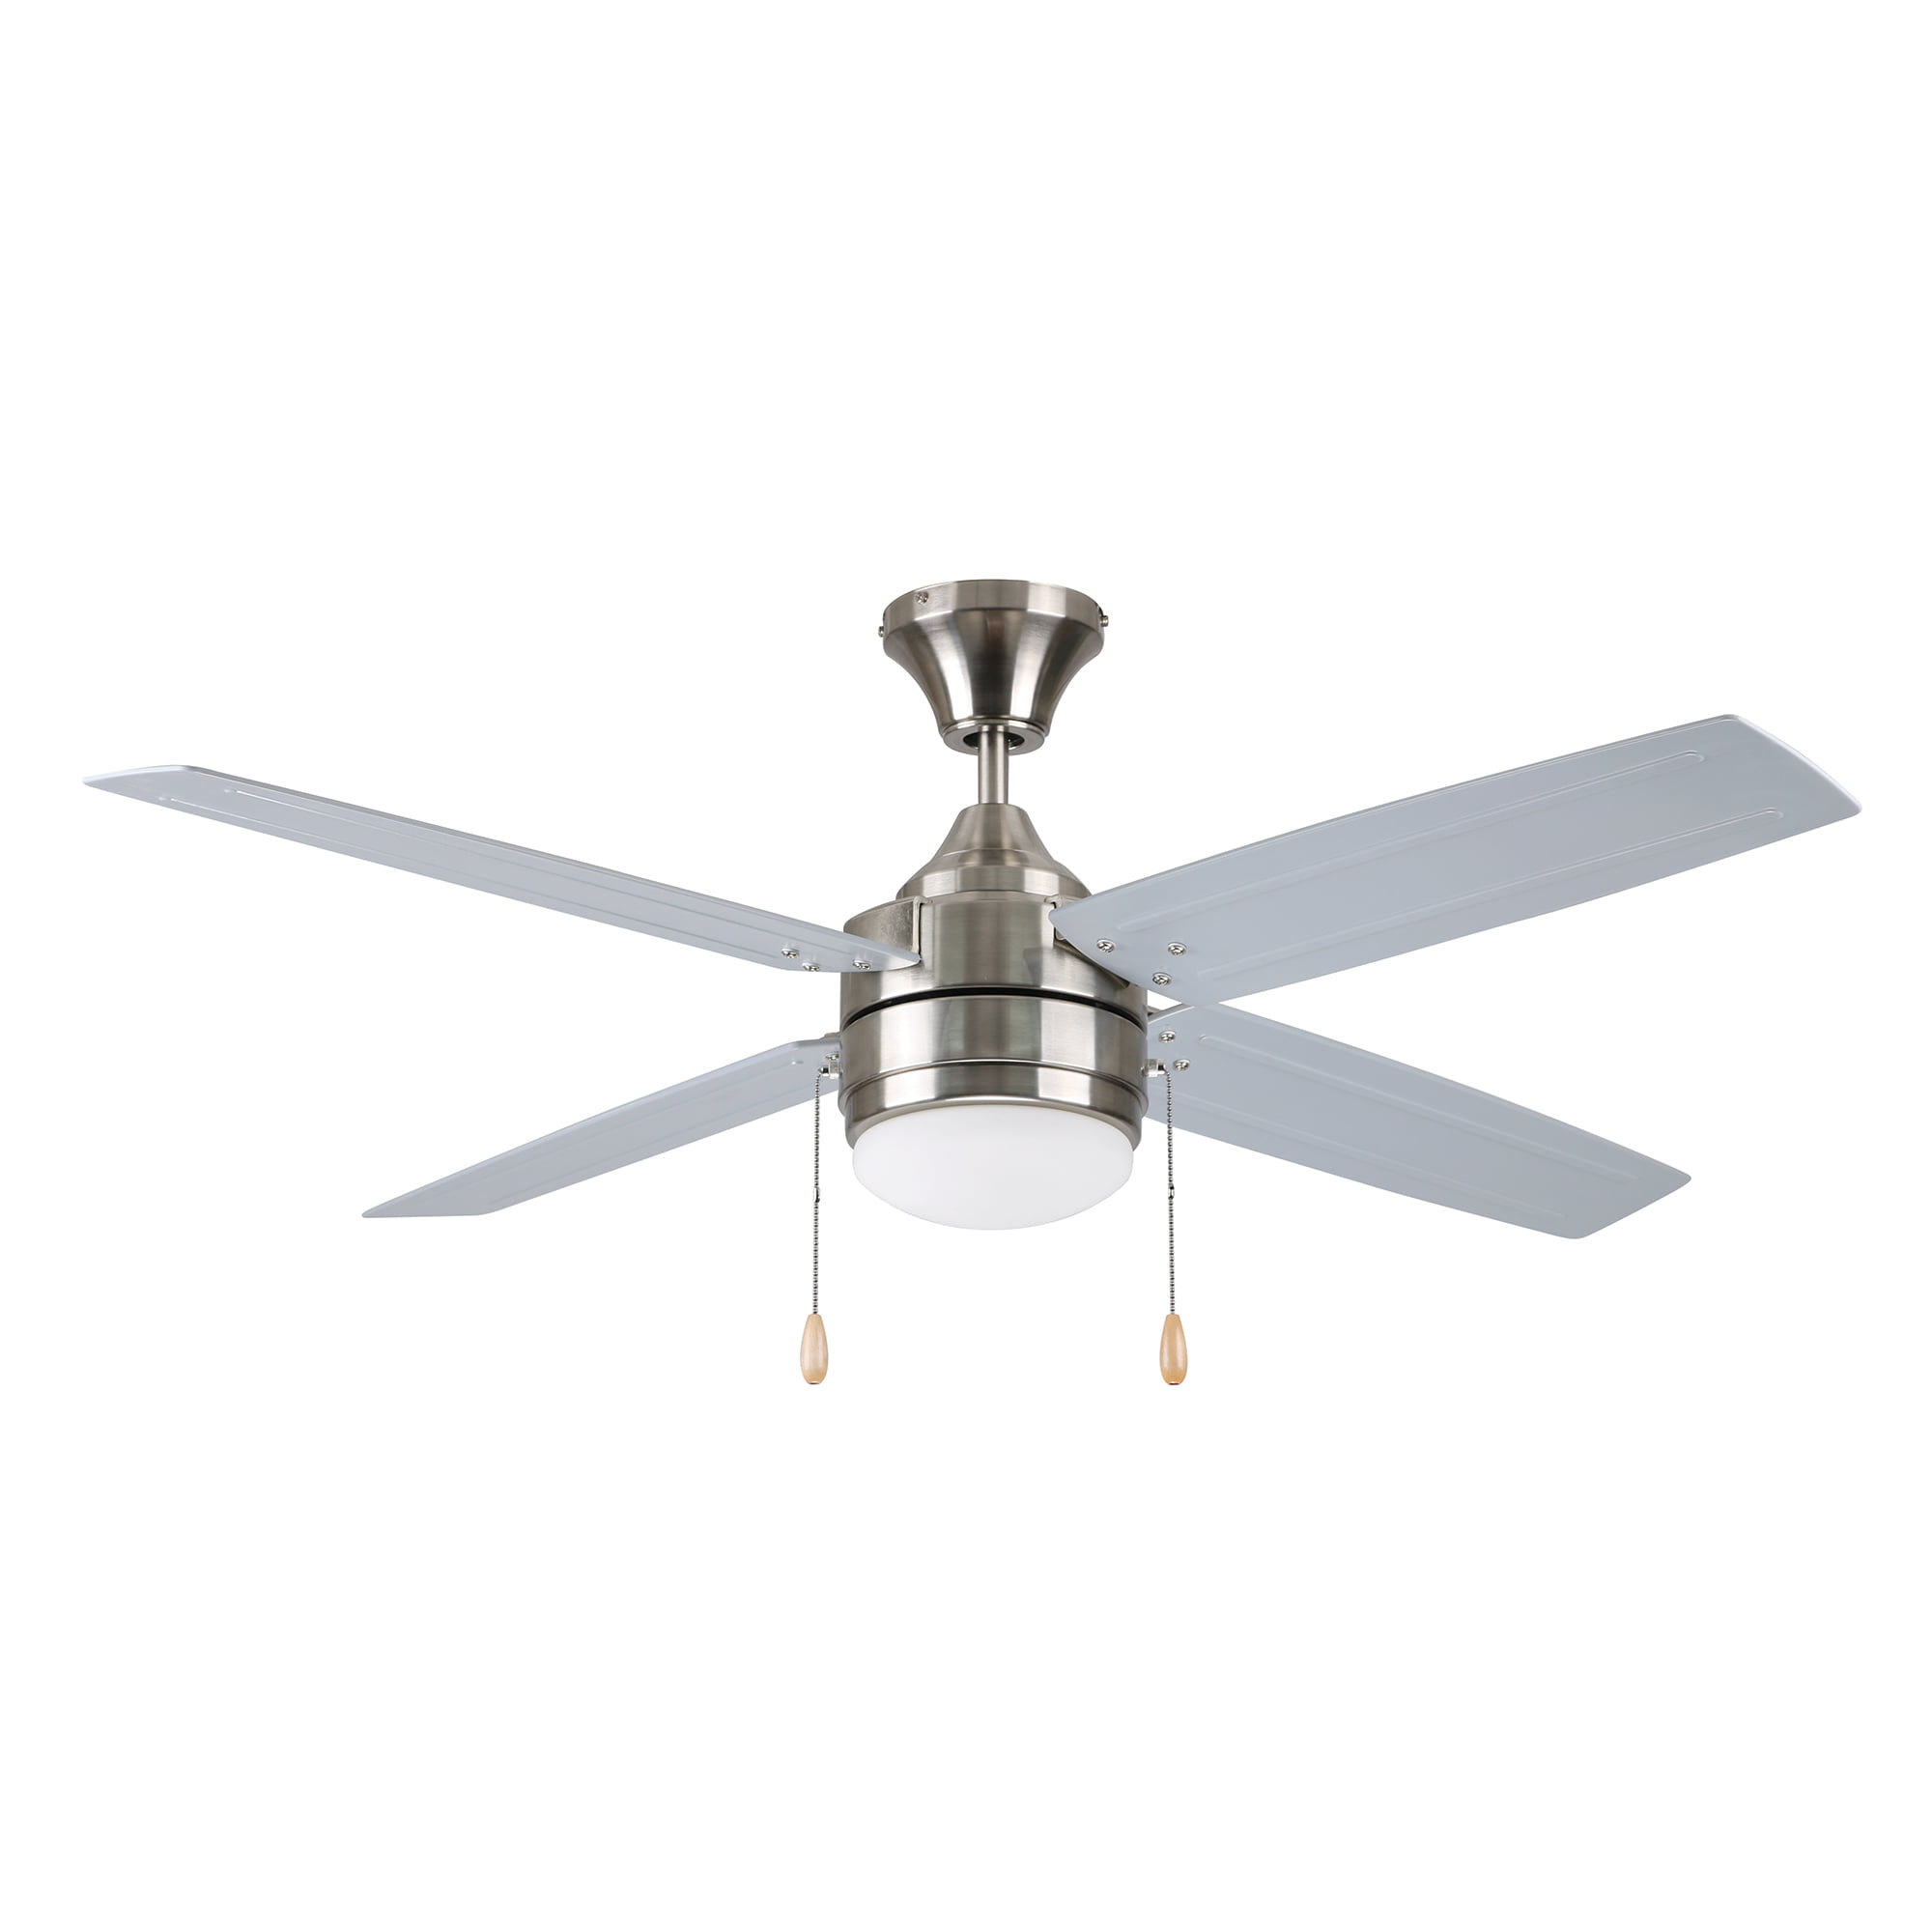 Details about   REPLACEMENT PARTS Hampton Bay Roanoke 48 in Matte White Ceiling Fan 